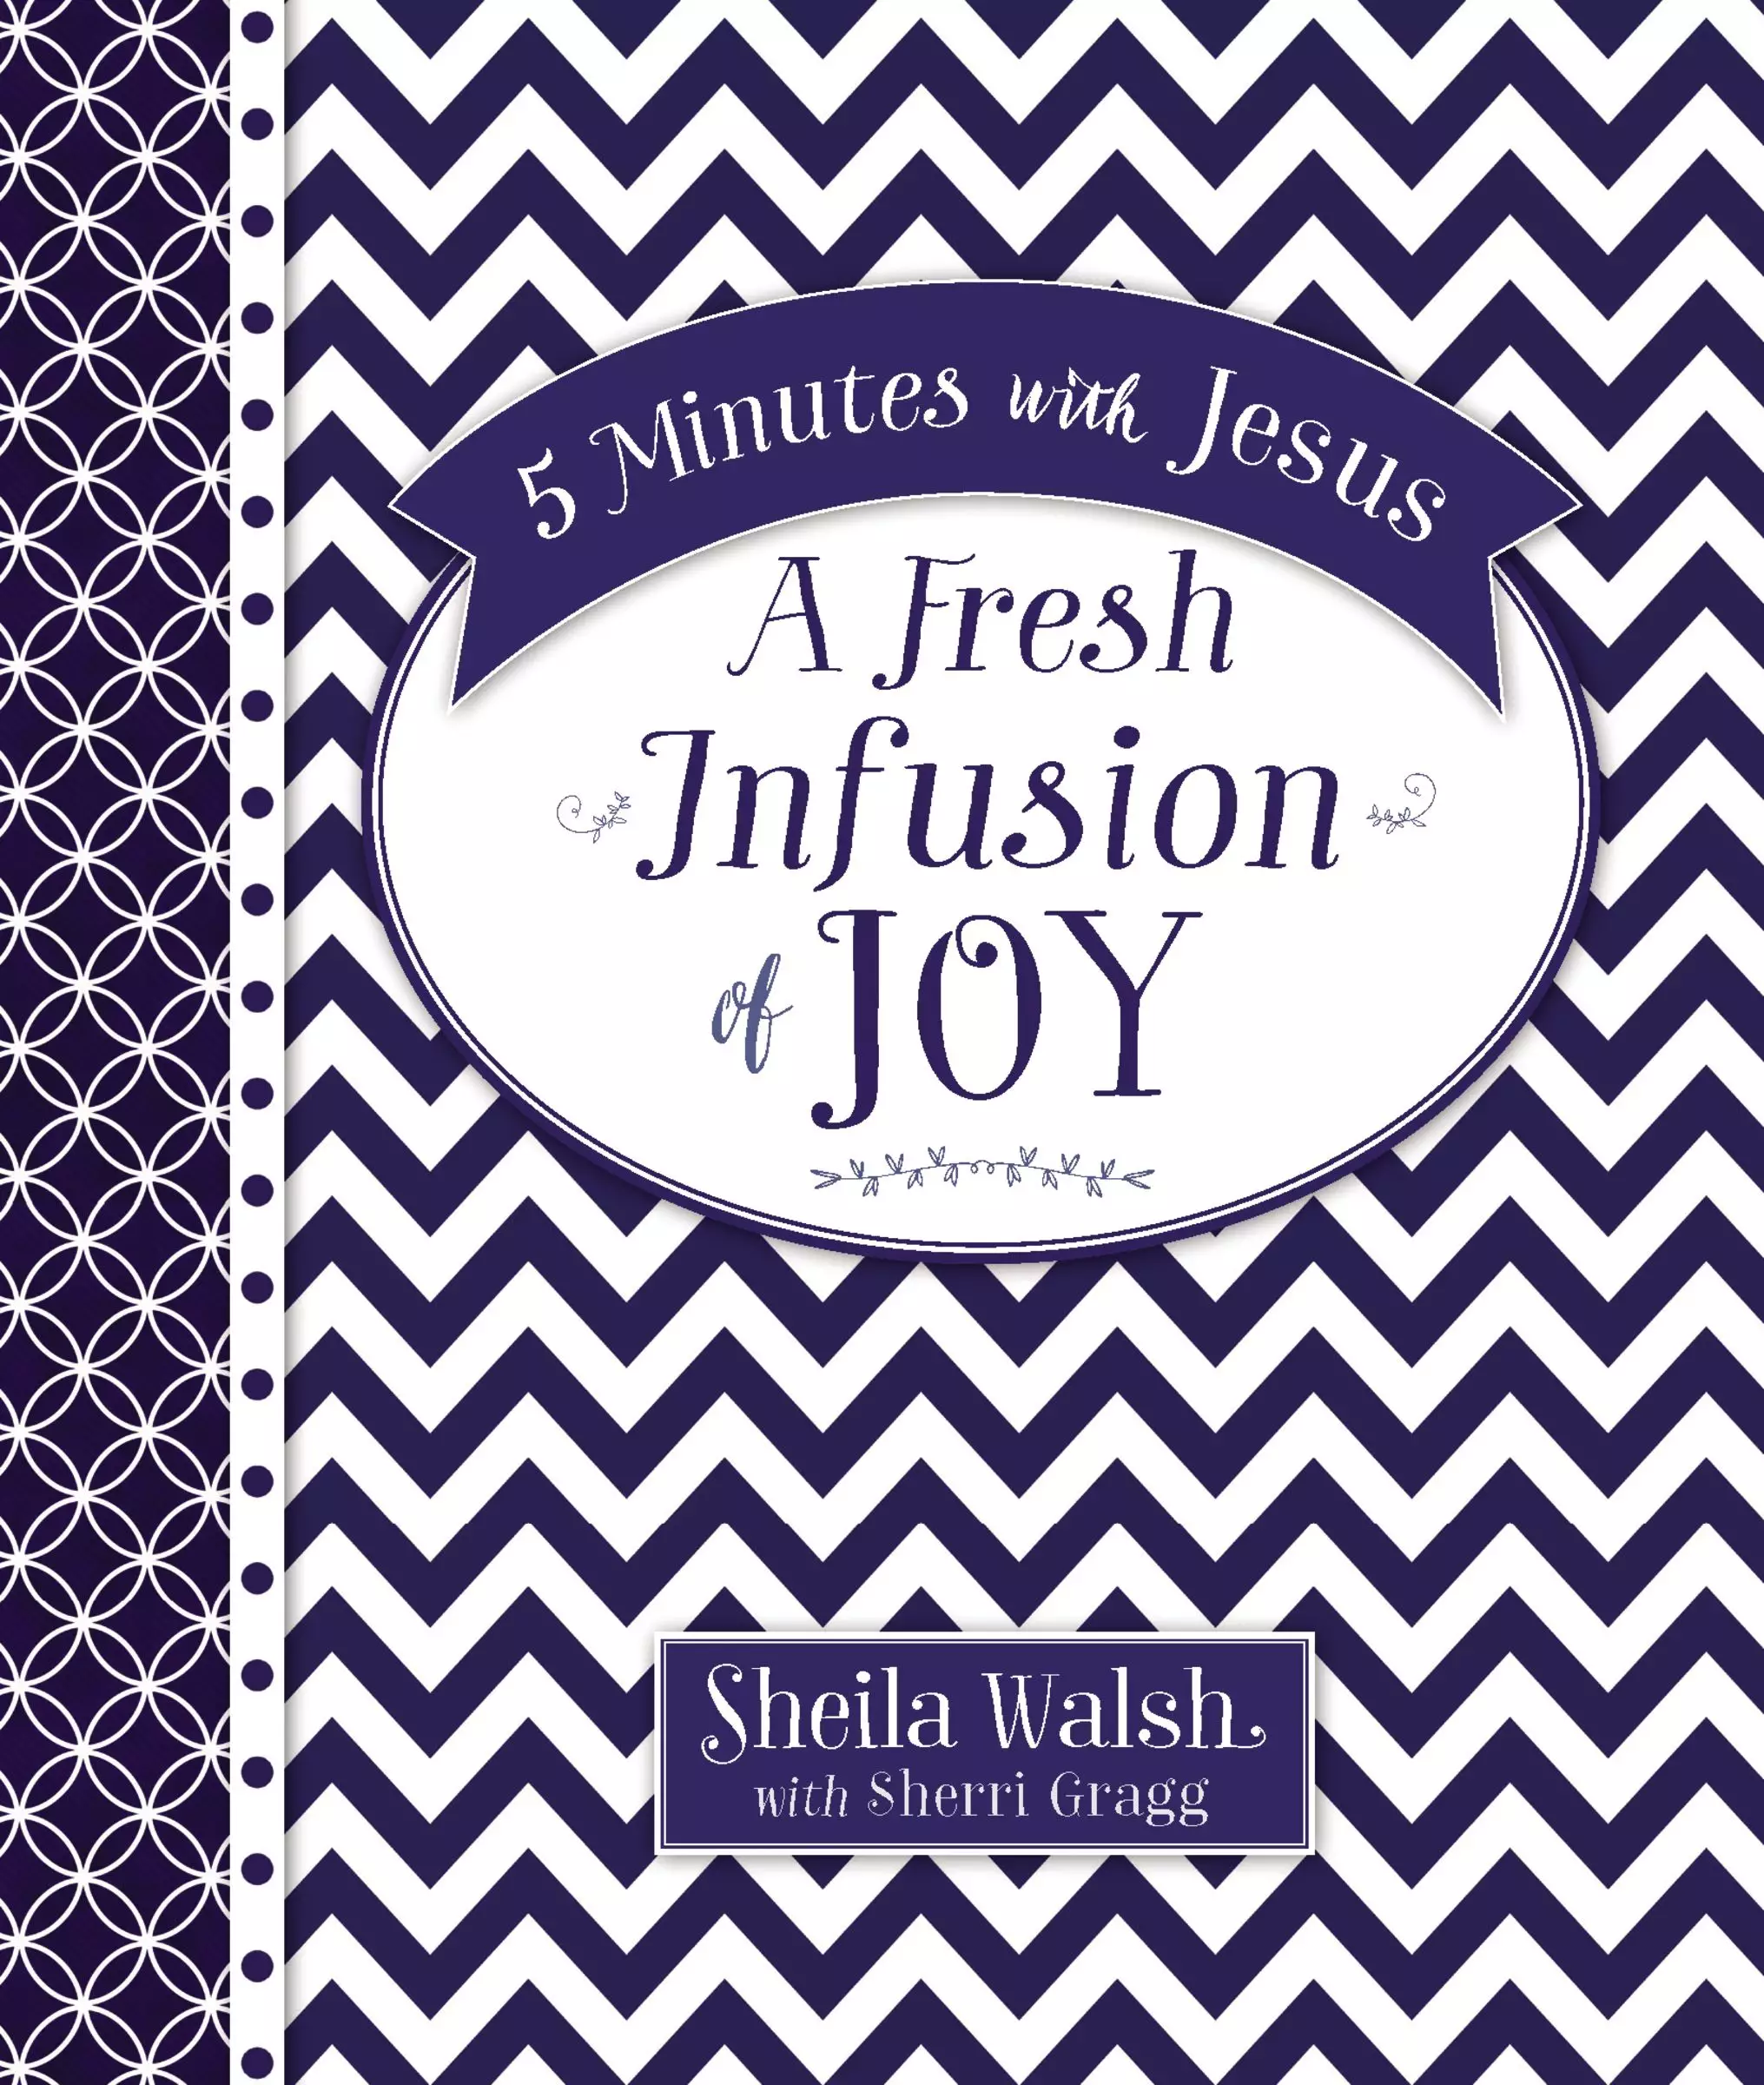 5 Minutes with Jesus: A Fresh Infusion of Joy